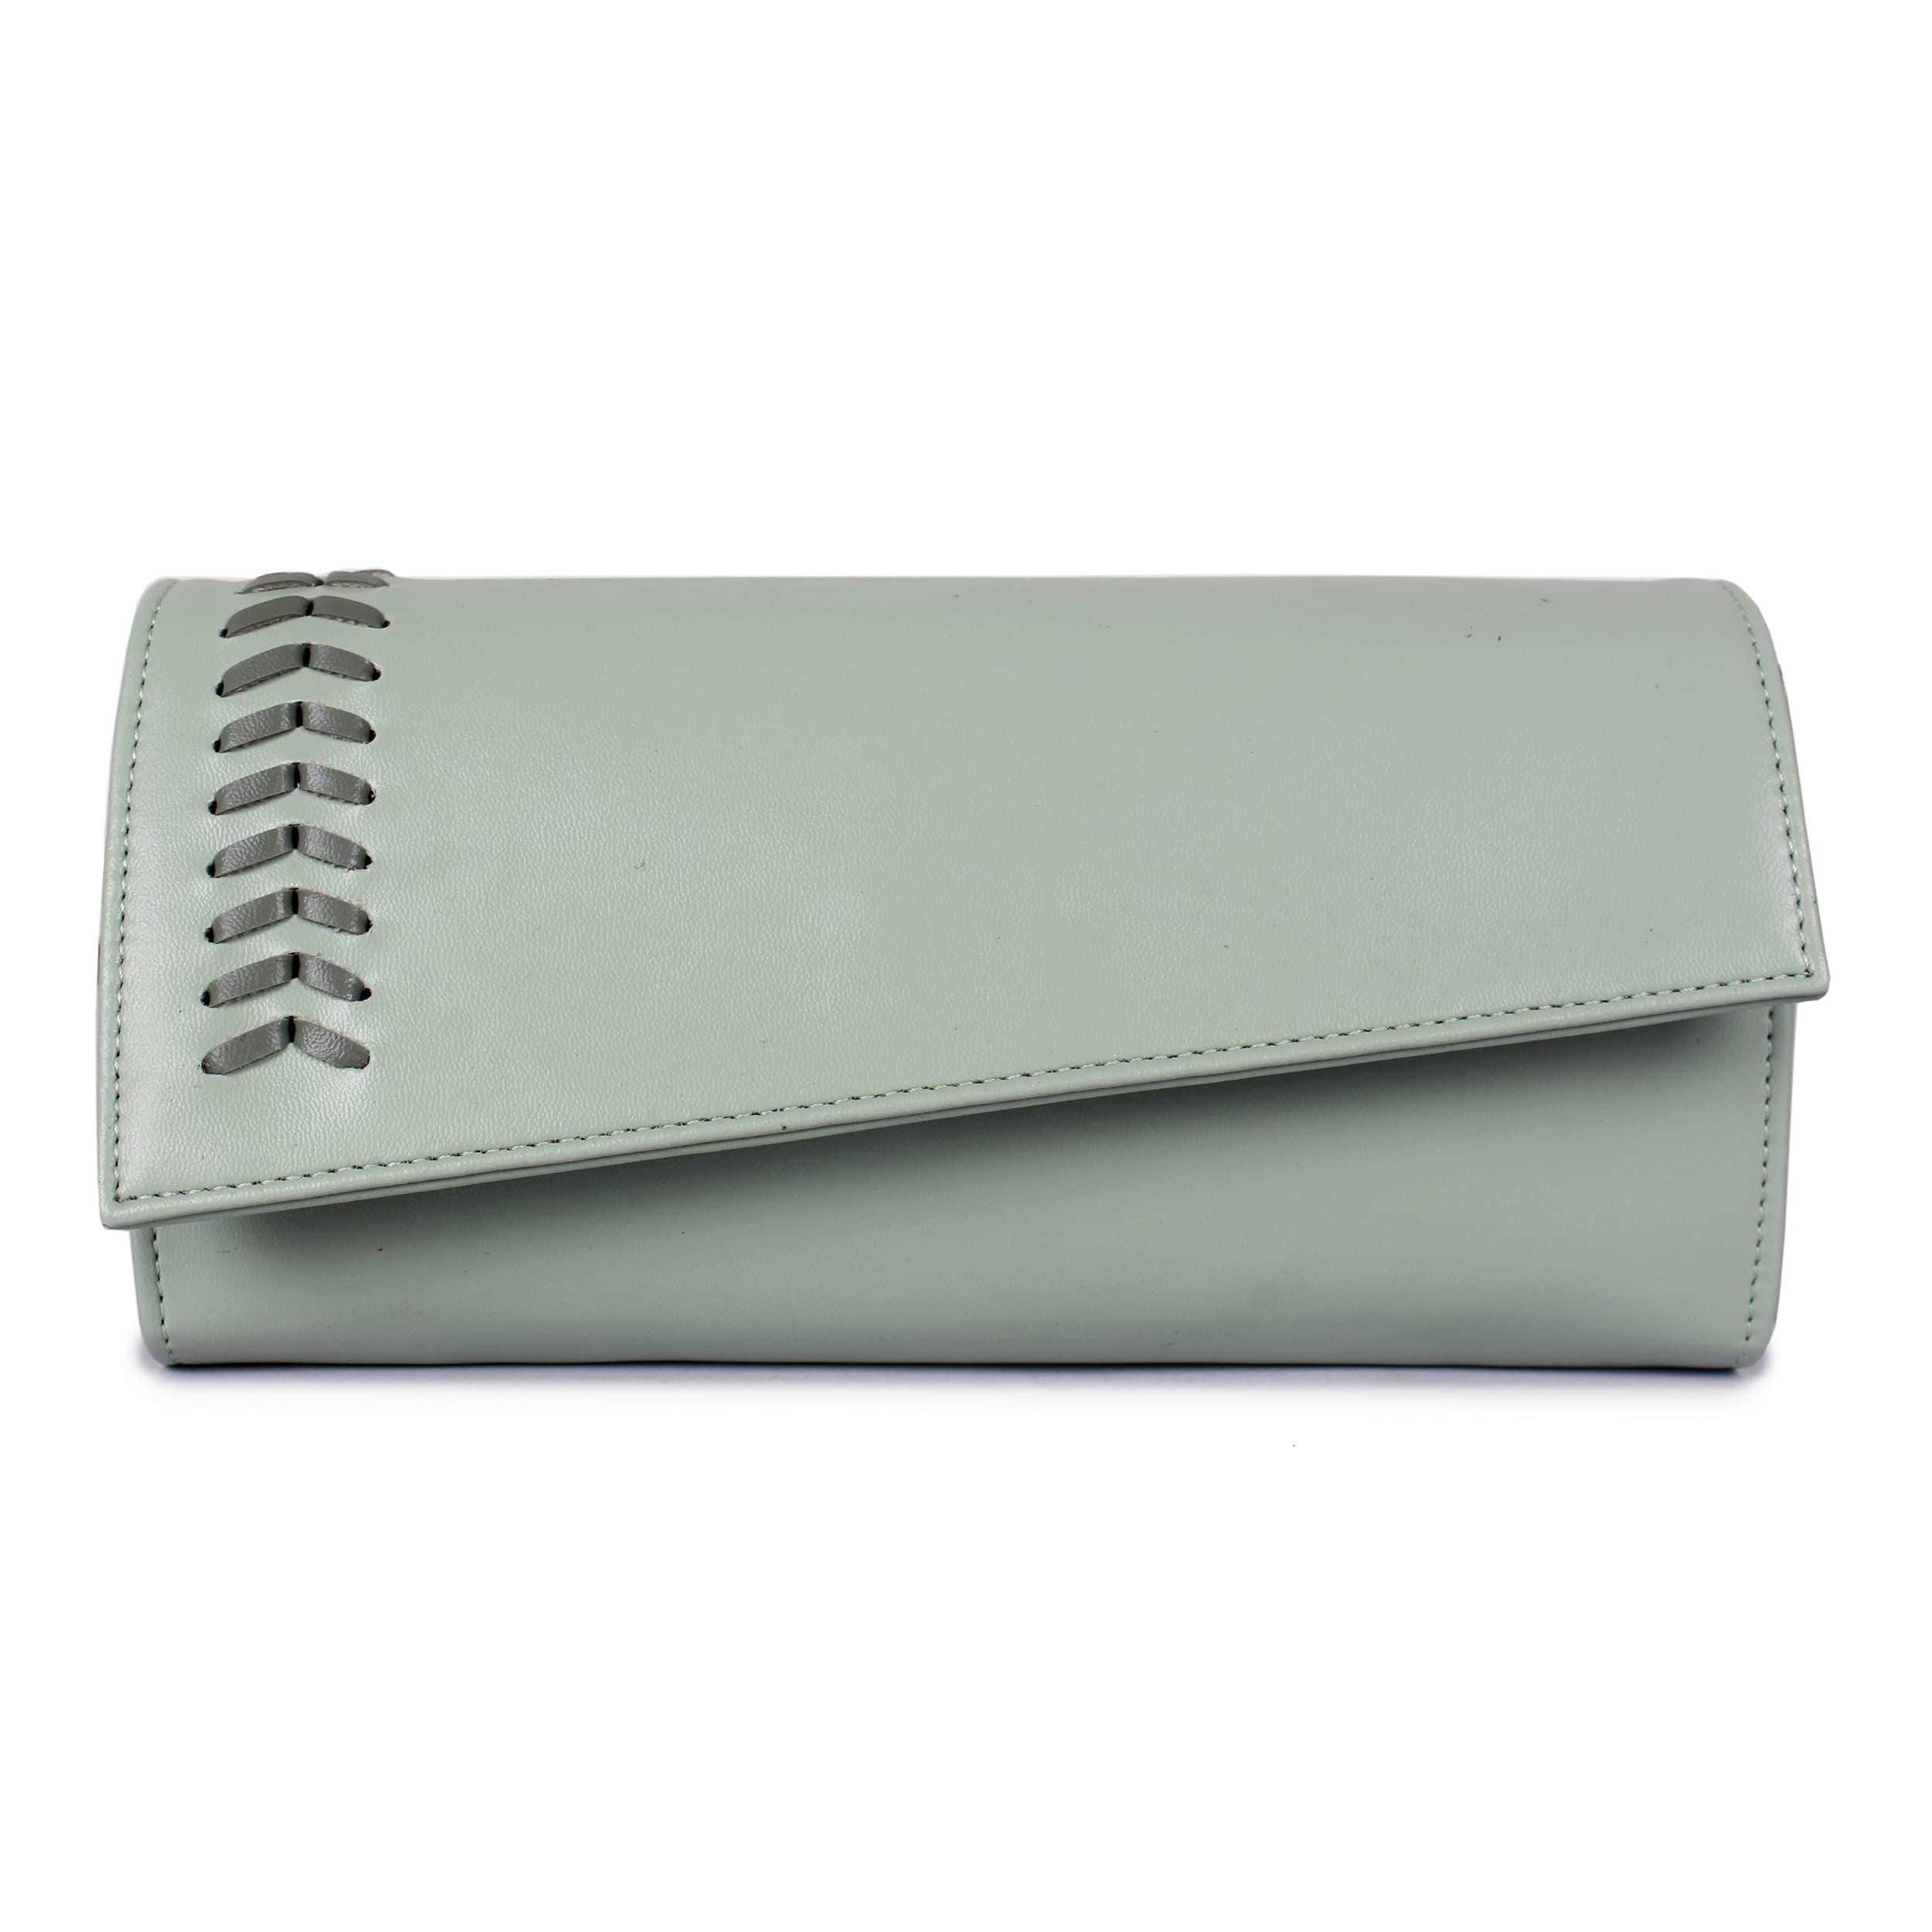 THE CLOWNFISH Myra Collection Womens Wallet Clutch Ladies Purse Sling Bag with Card slots (Pistachio Green)